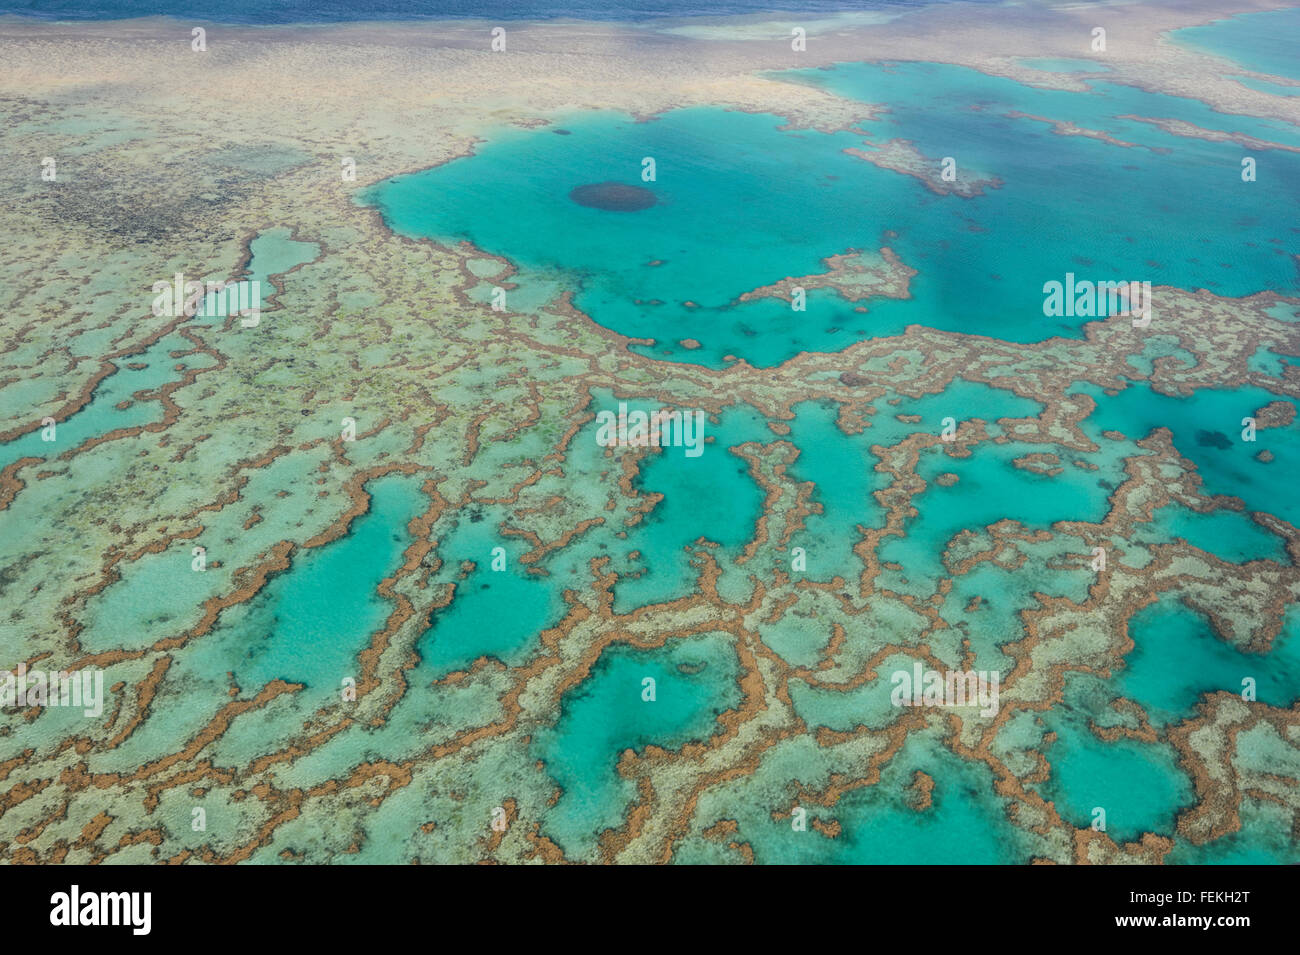 Aerial View of the Great Barrier Reef, Whitsunday Islands, Queensland, Australia Stock Photo